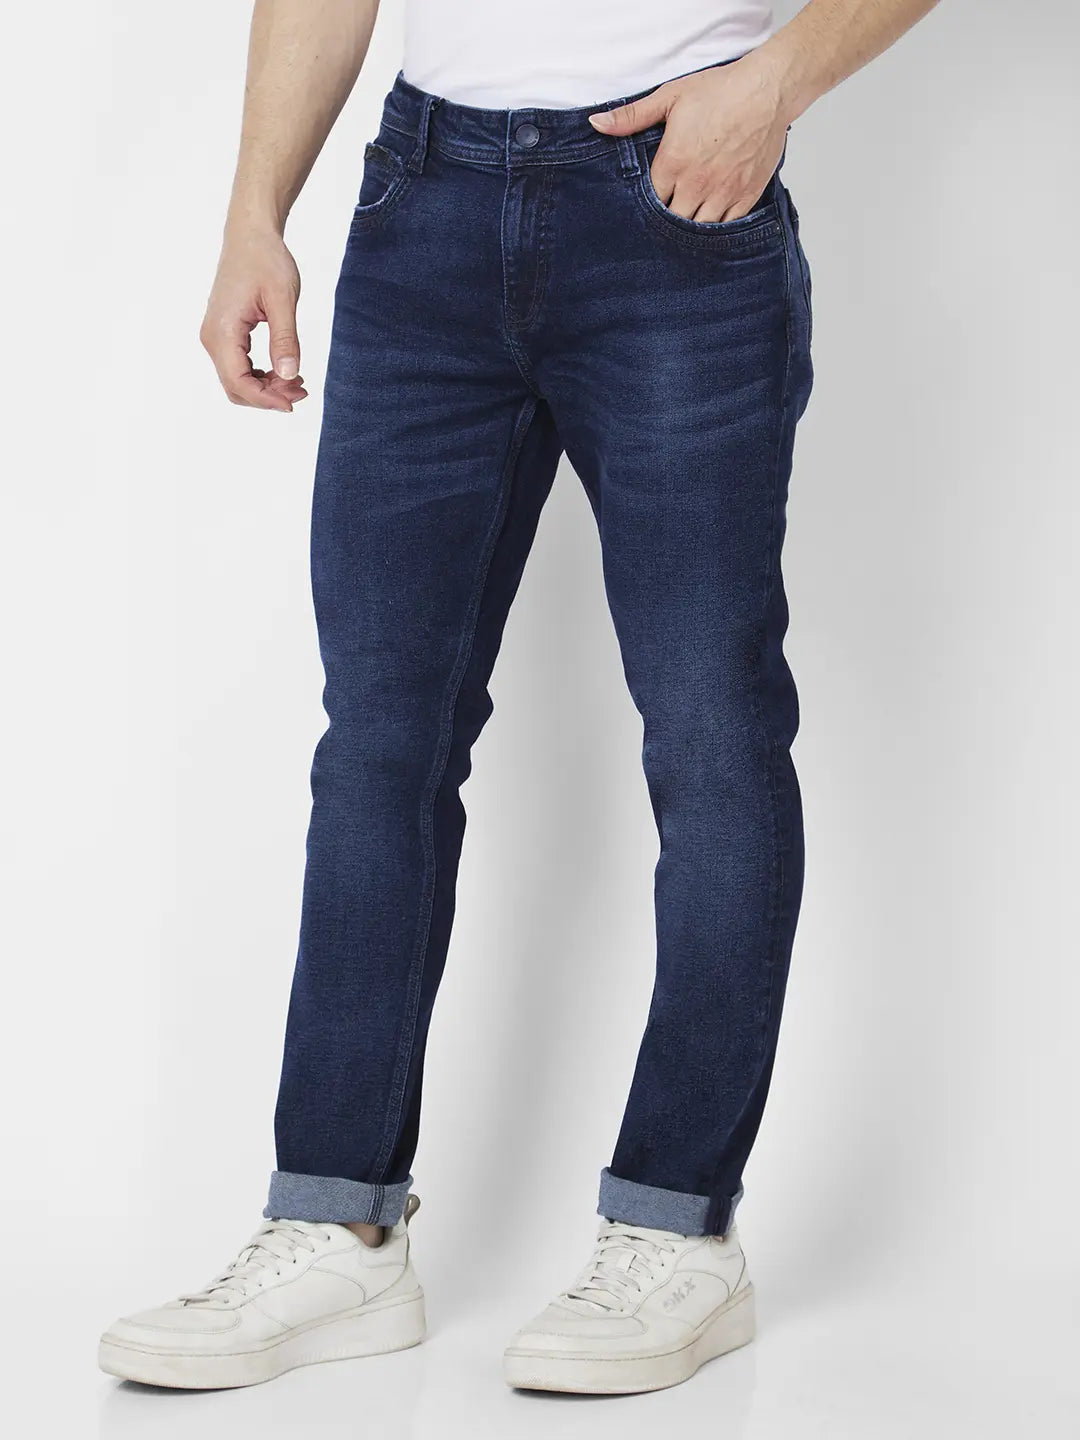 Buy Spykar Mens Cotton LT.Blue Solid Jeans at Amazon.in